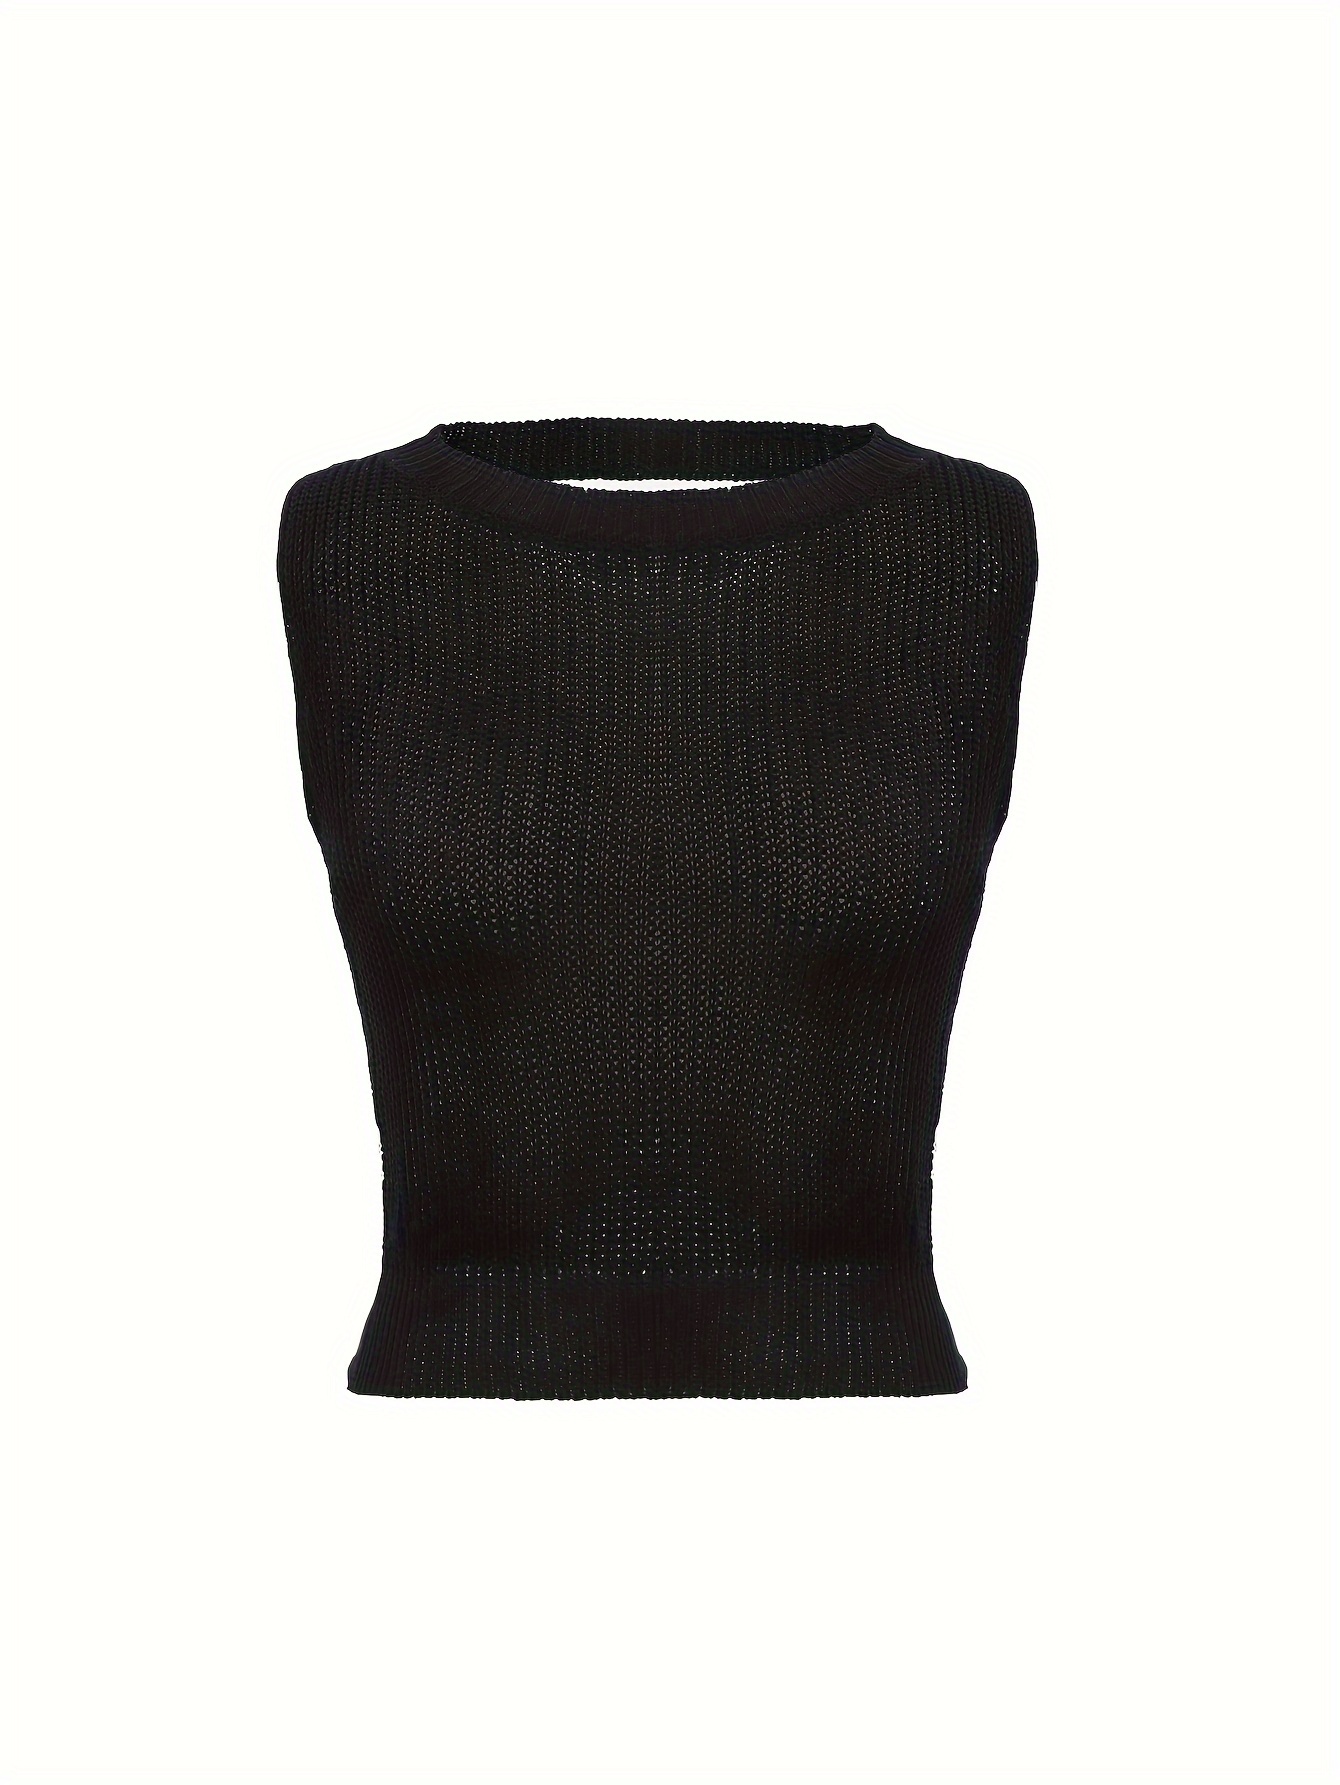 Lu's Chic Women's Crop Tank Top Knit Vest Sleeveless Ribbed Sexy Soft Cozy  Summer Casual Fashion Pullovers Black Small